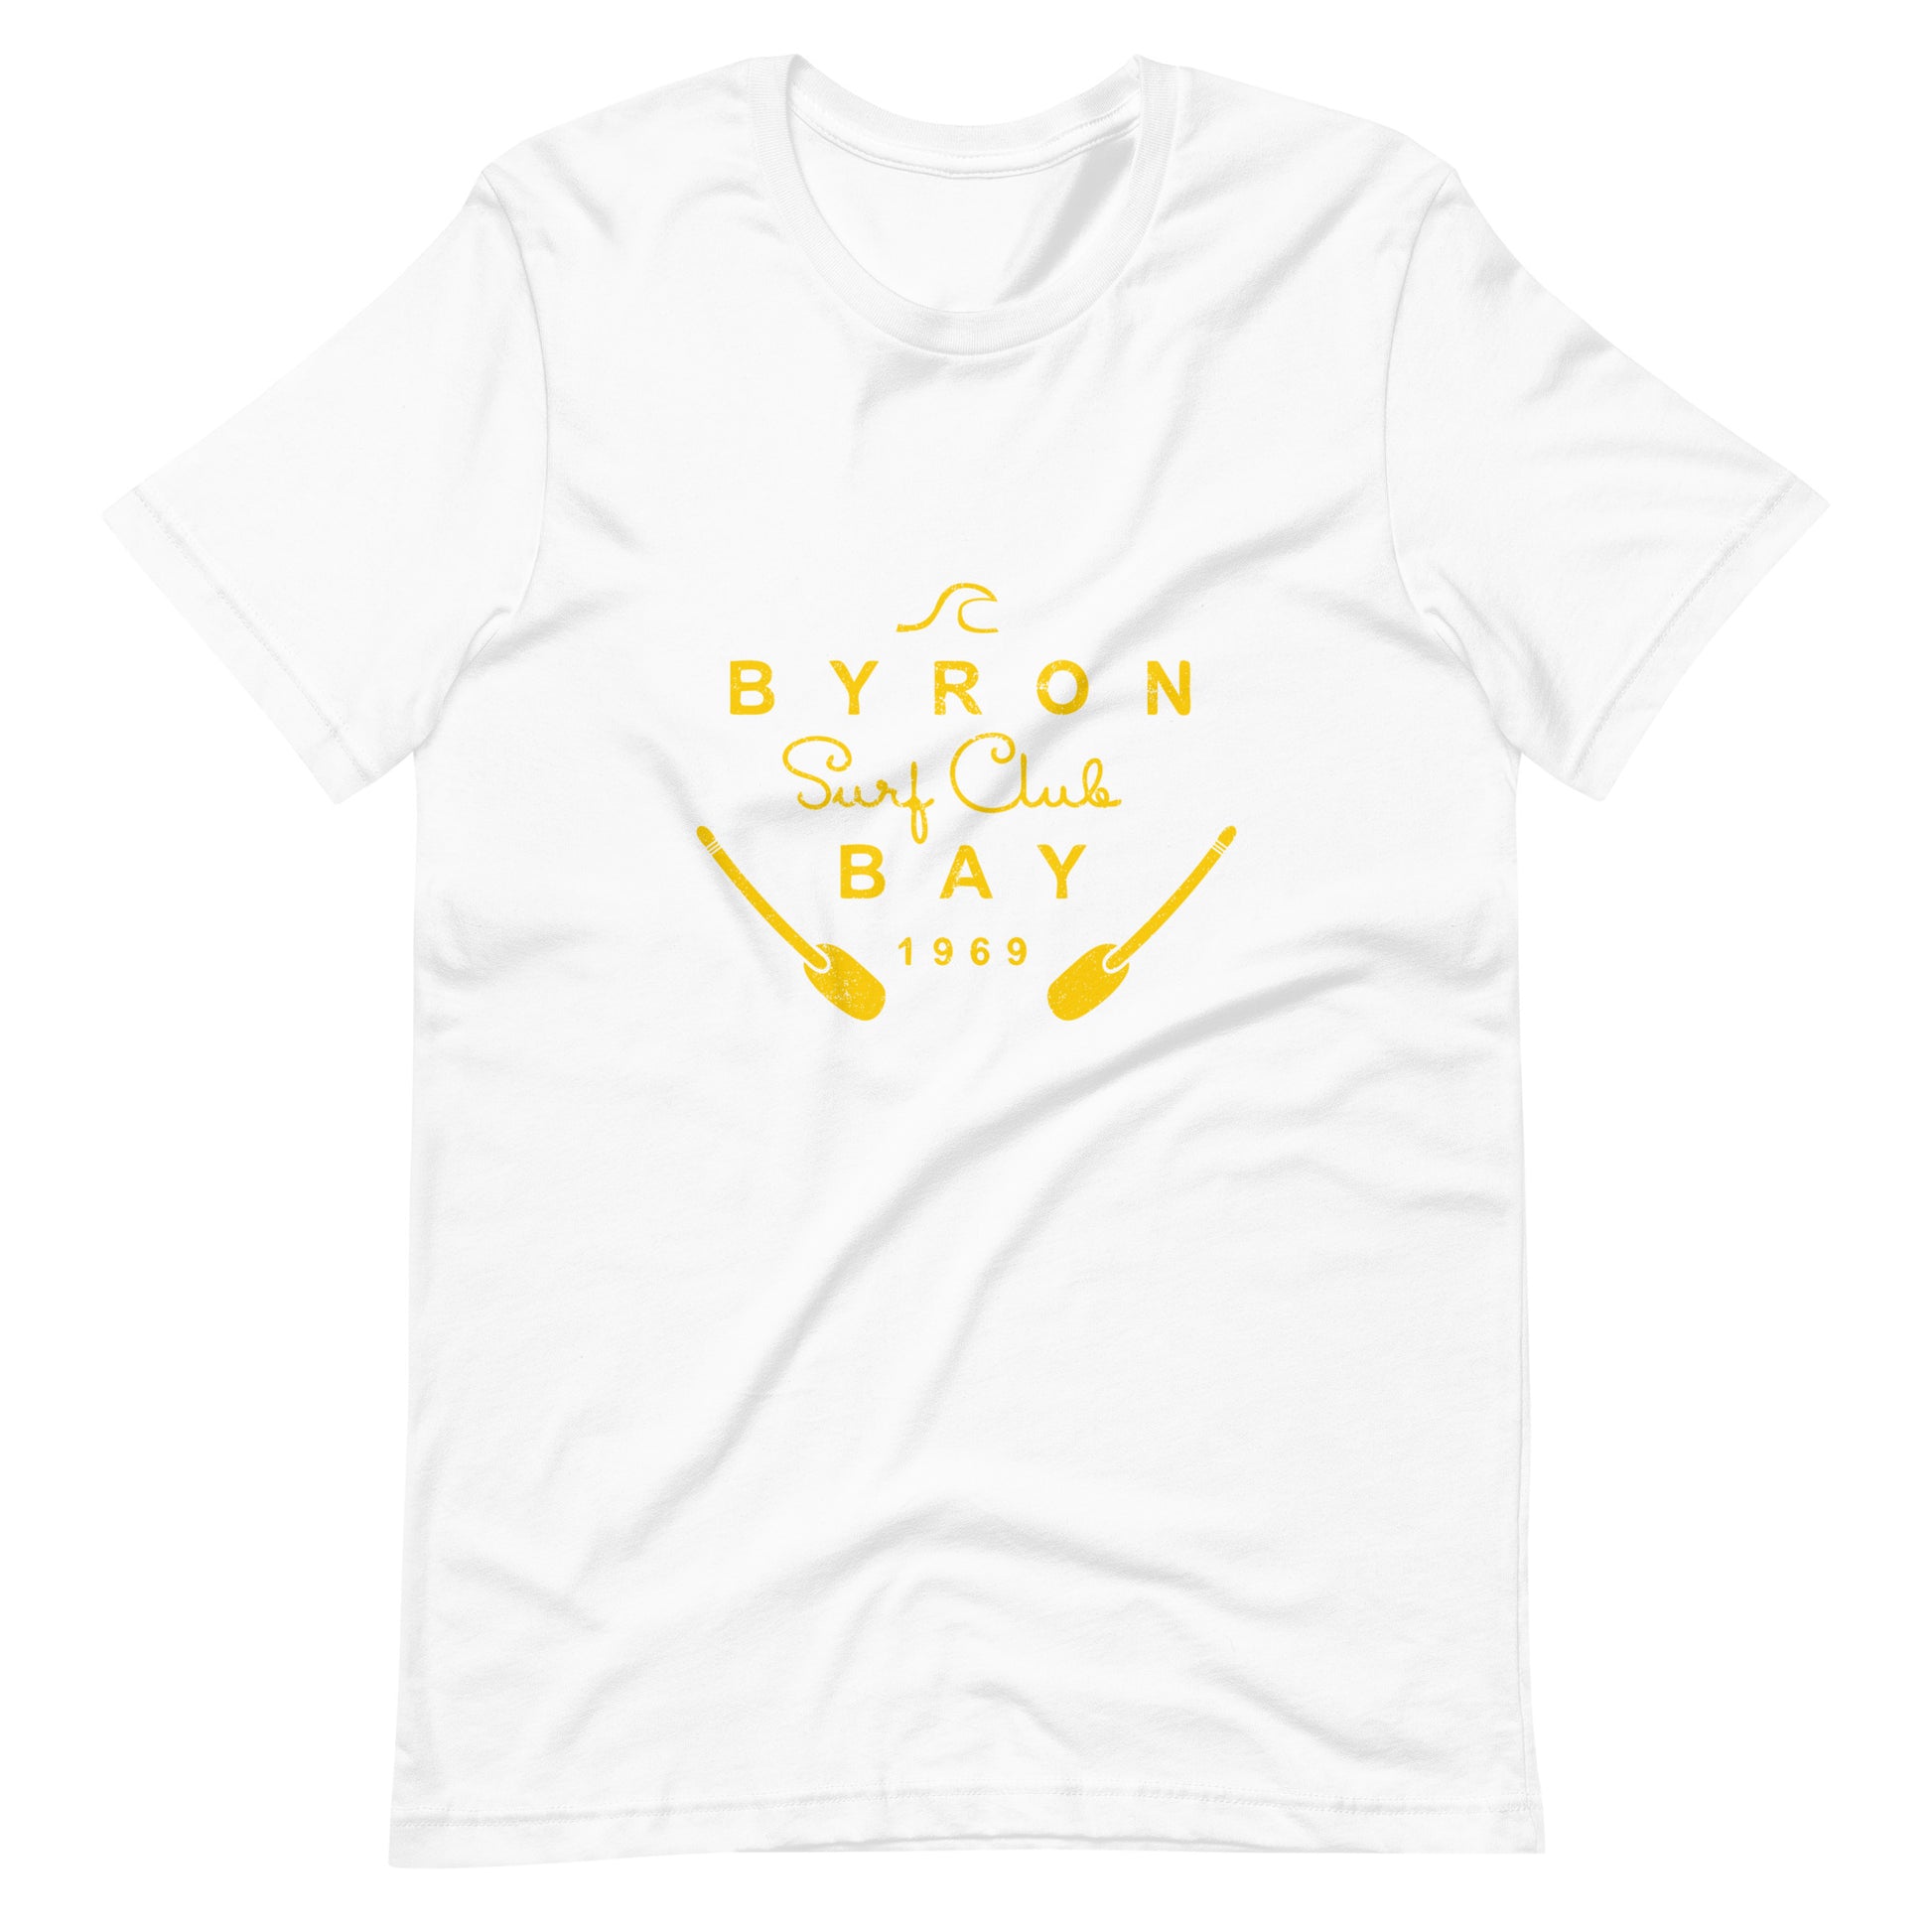  Unisex T-Shirt - White - Front flat lay view - yellow Byron Bay Surf Club logo on front - Genuine Byron Bay Merchandise | Produced by Go Sea Kayak Byron Bay 